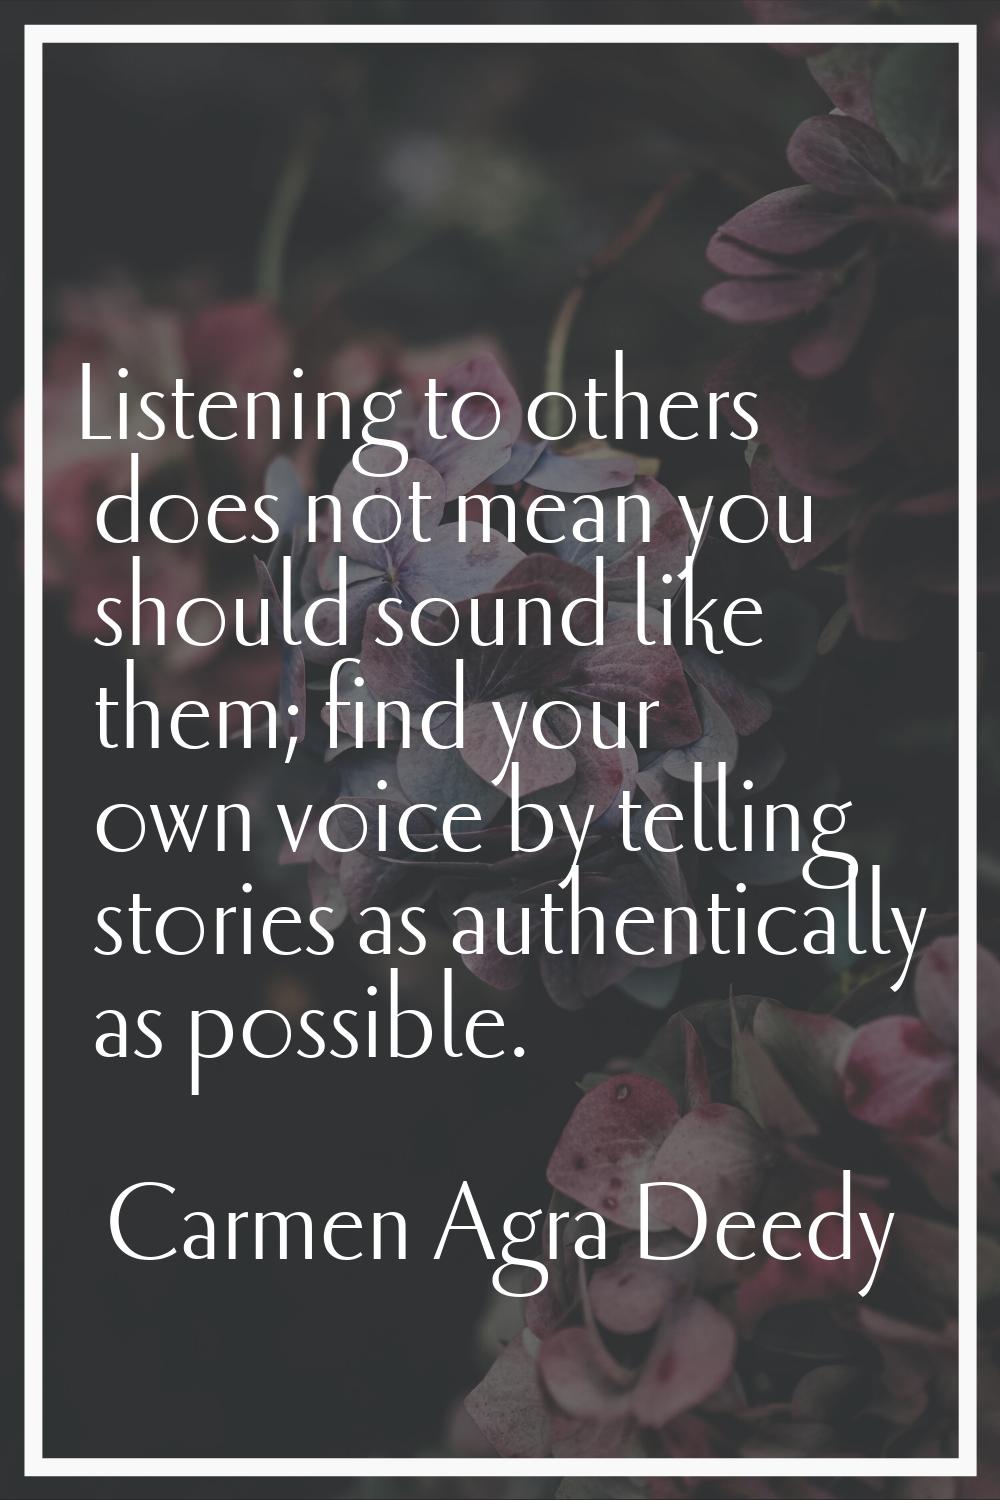 Listening to others does not mean you should sound like them; find your own voice by telling storie